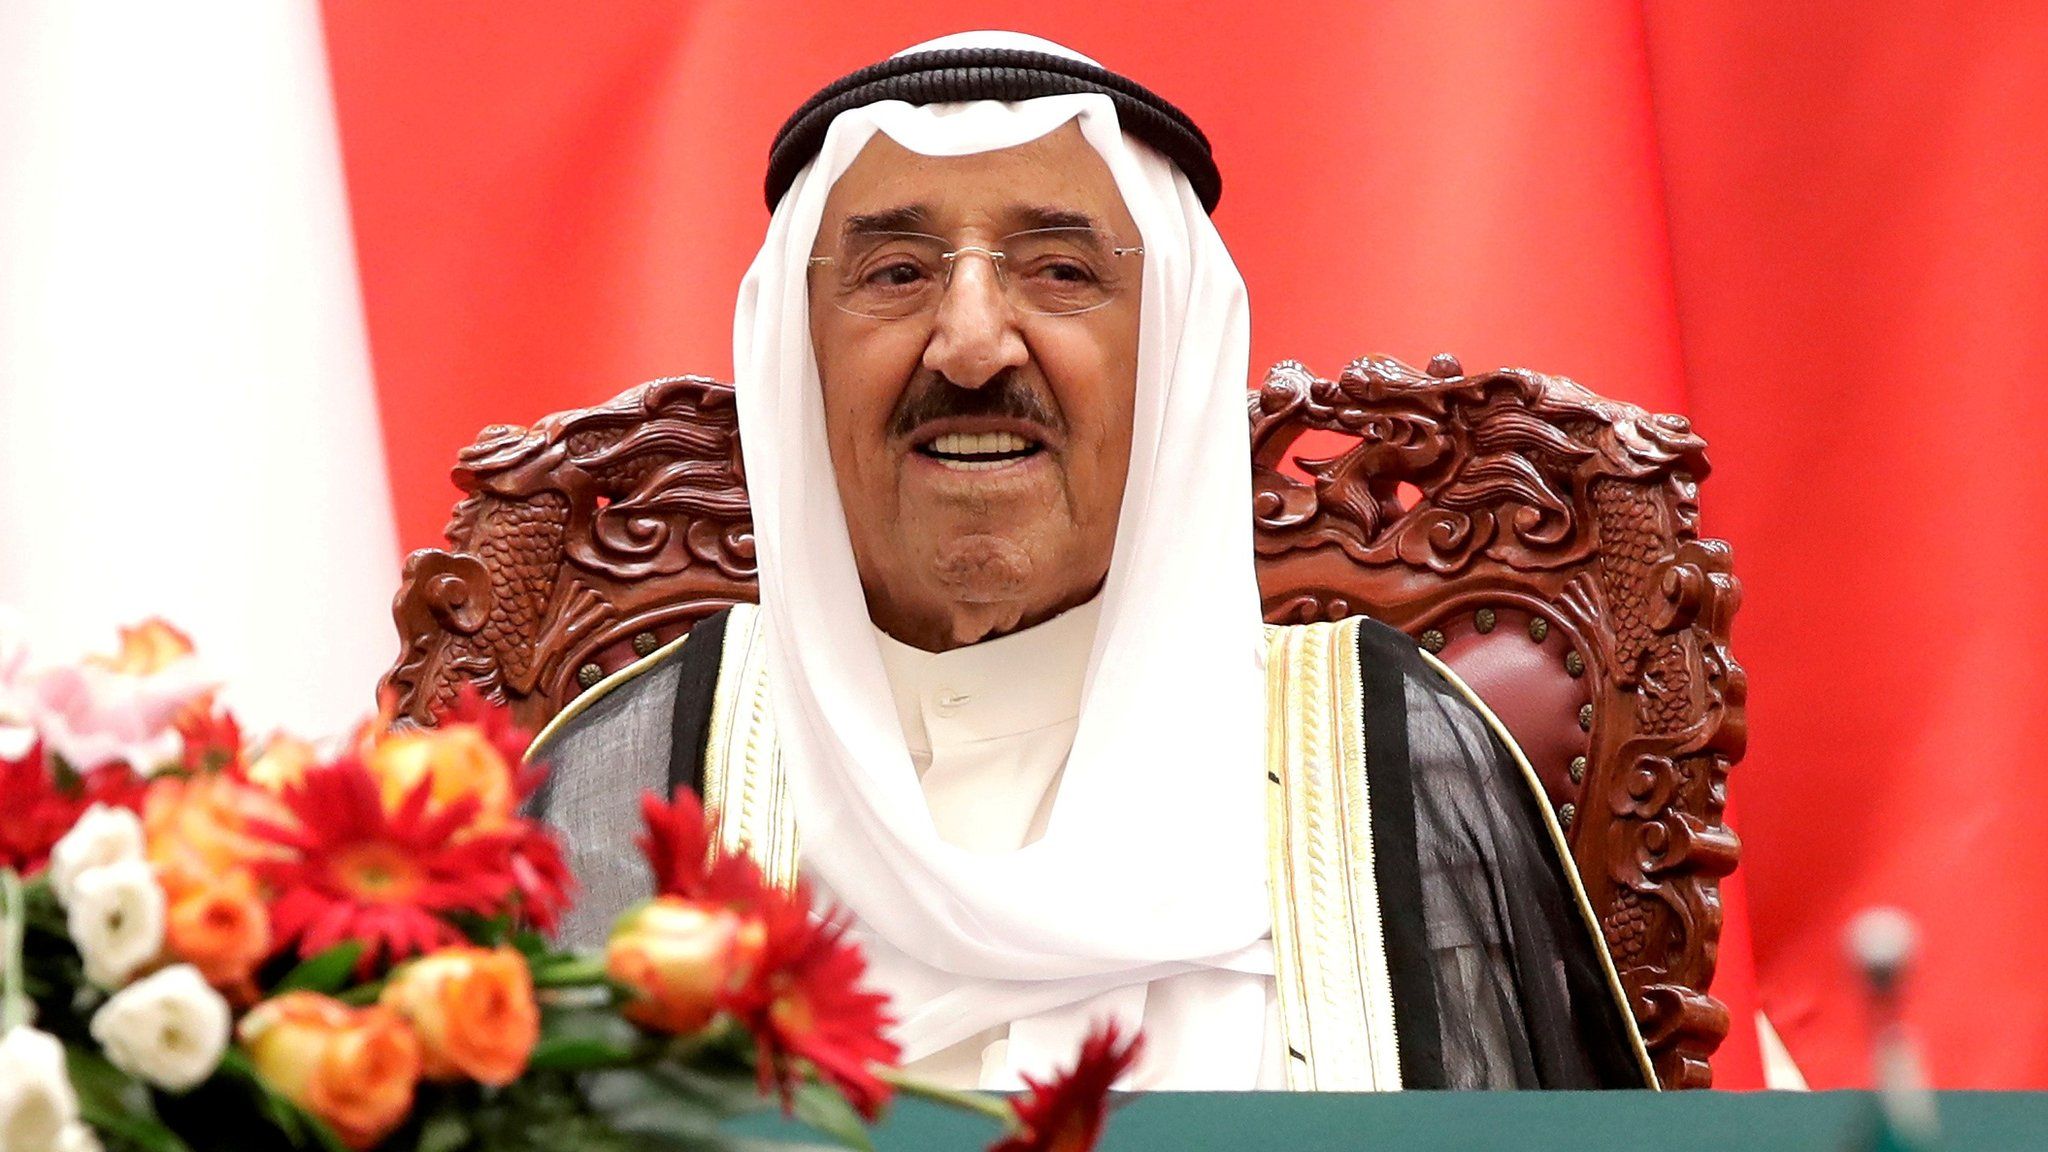 Kuwait's Emir Sheikh Sheikh Sabah al-Ahmed al-Sabah witnesses a signing ceremony at the Great Hall of the People in Beijing, China (9 July 2018)